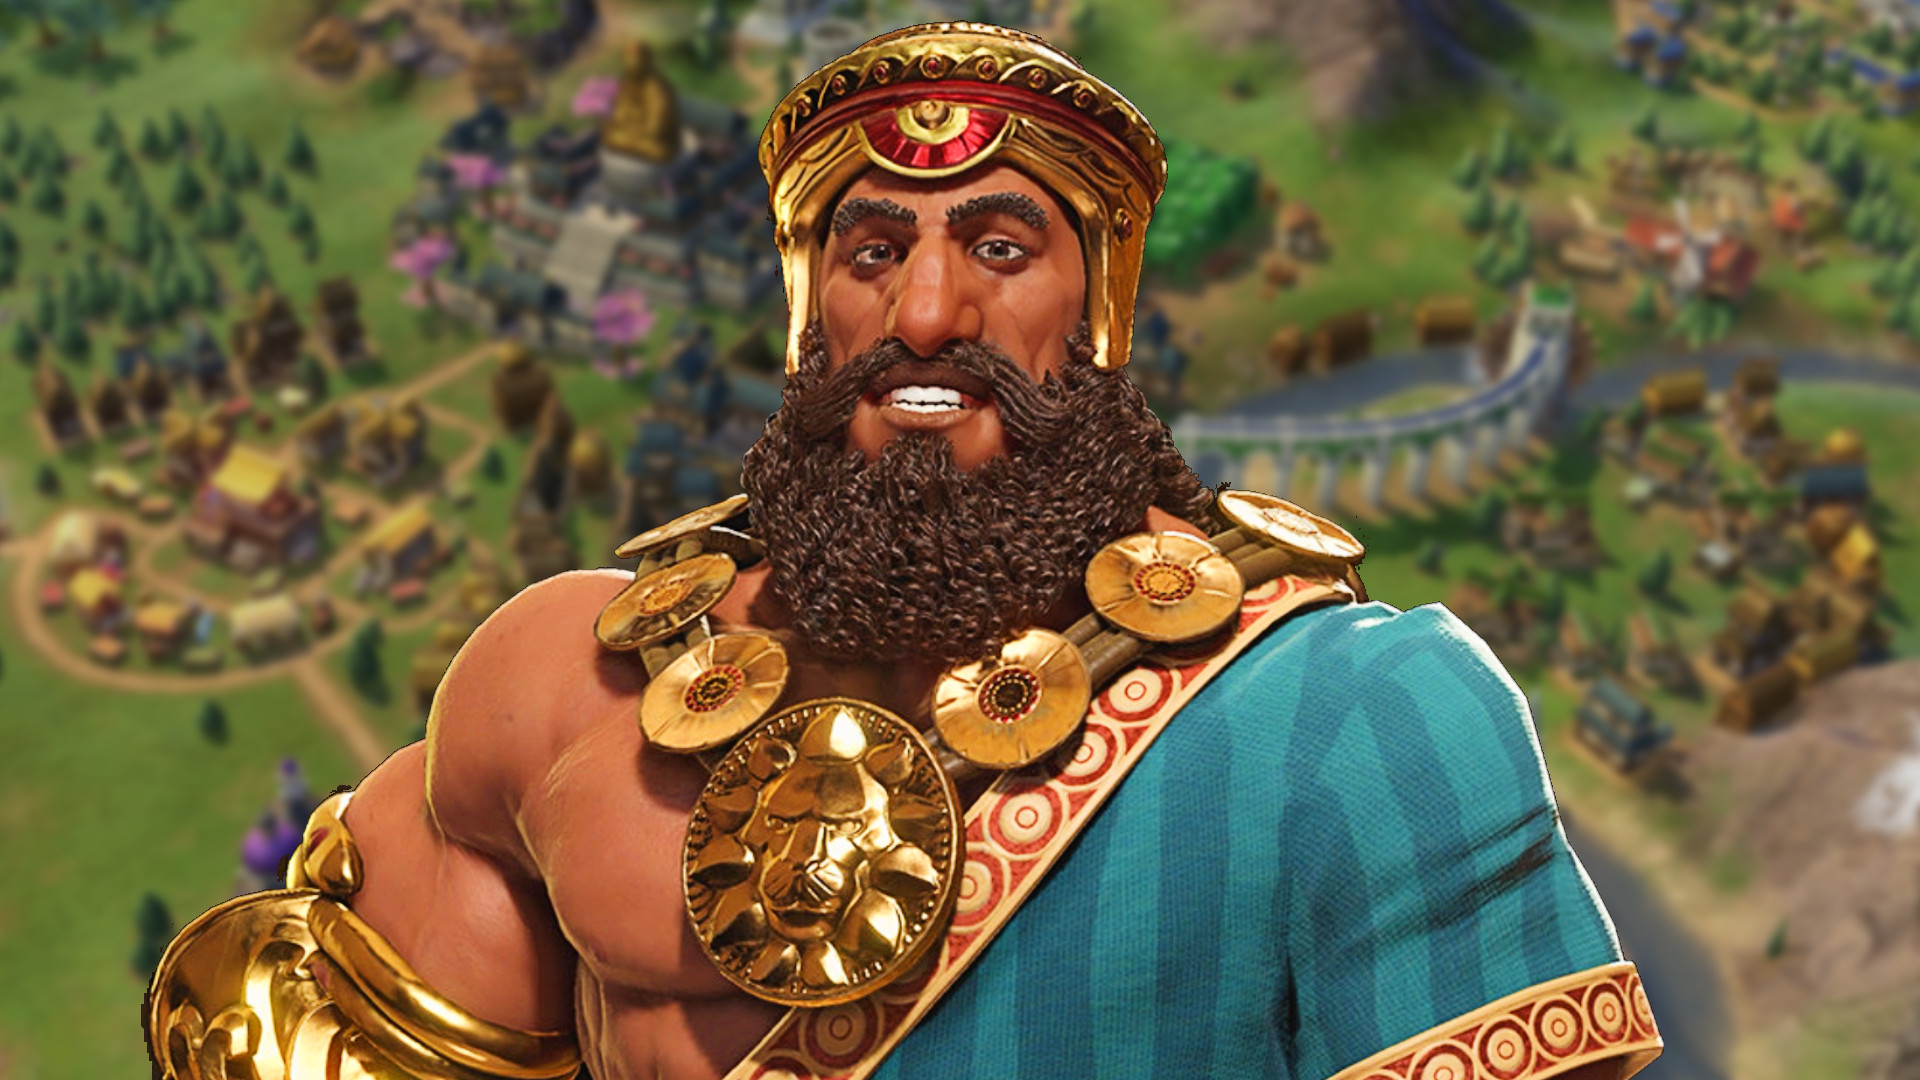 Civilization 7 is officially in development, Firaxis confirms